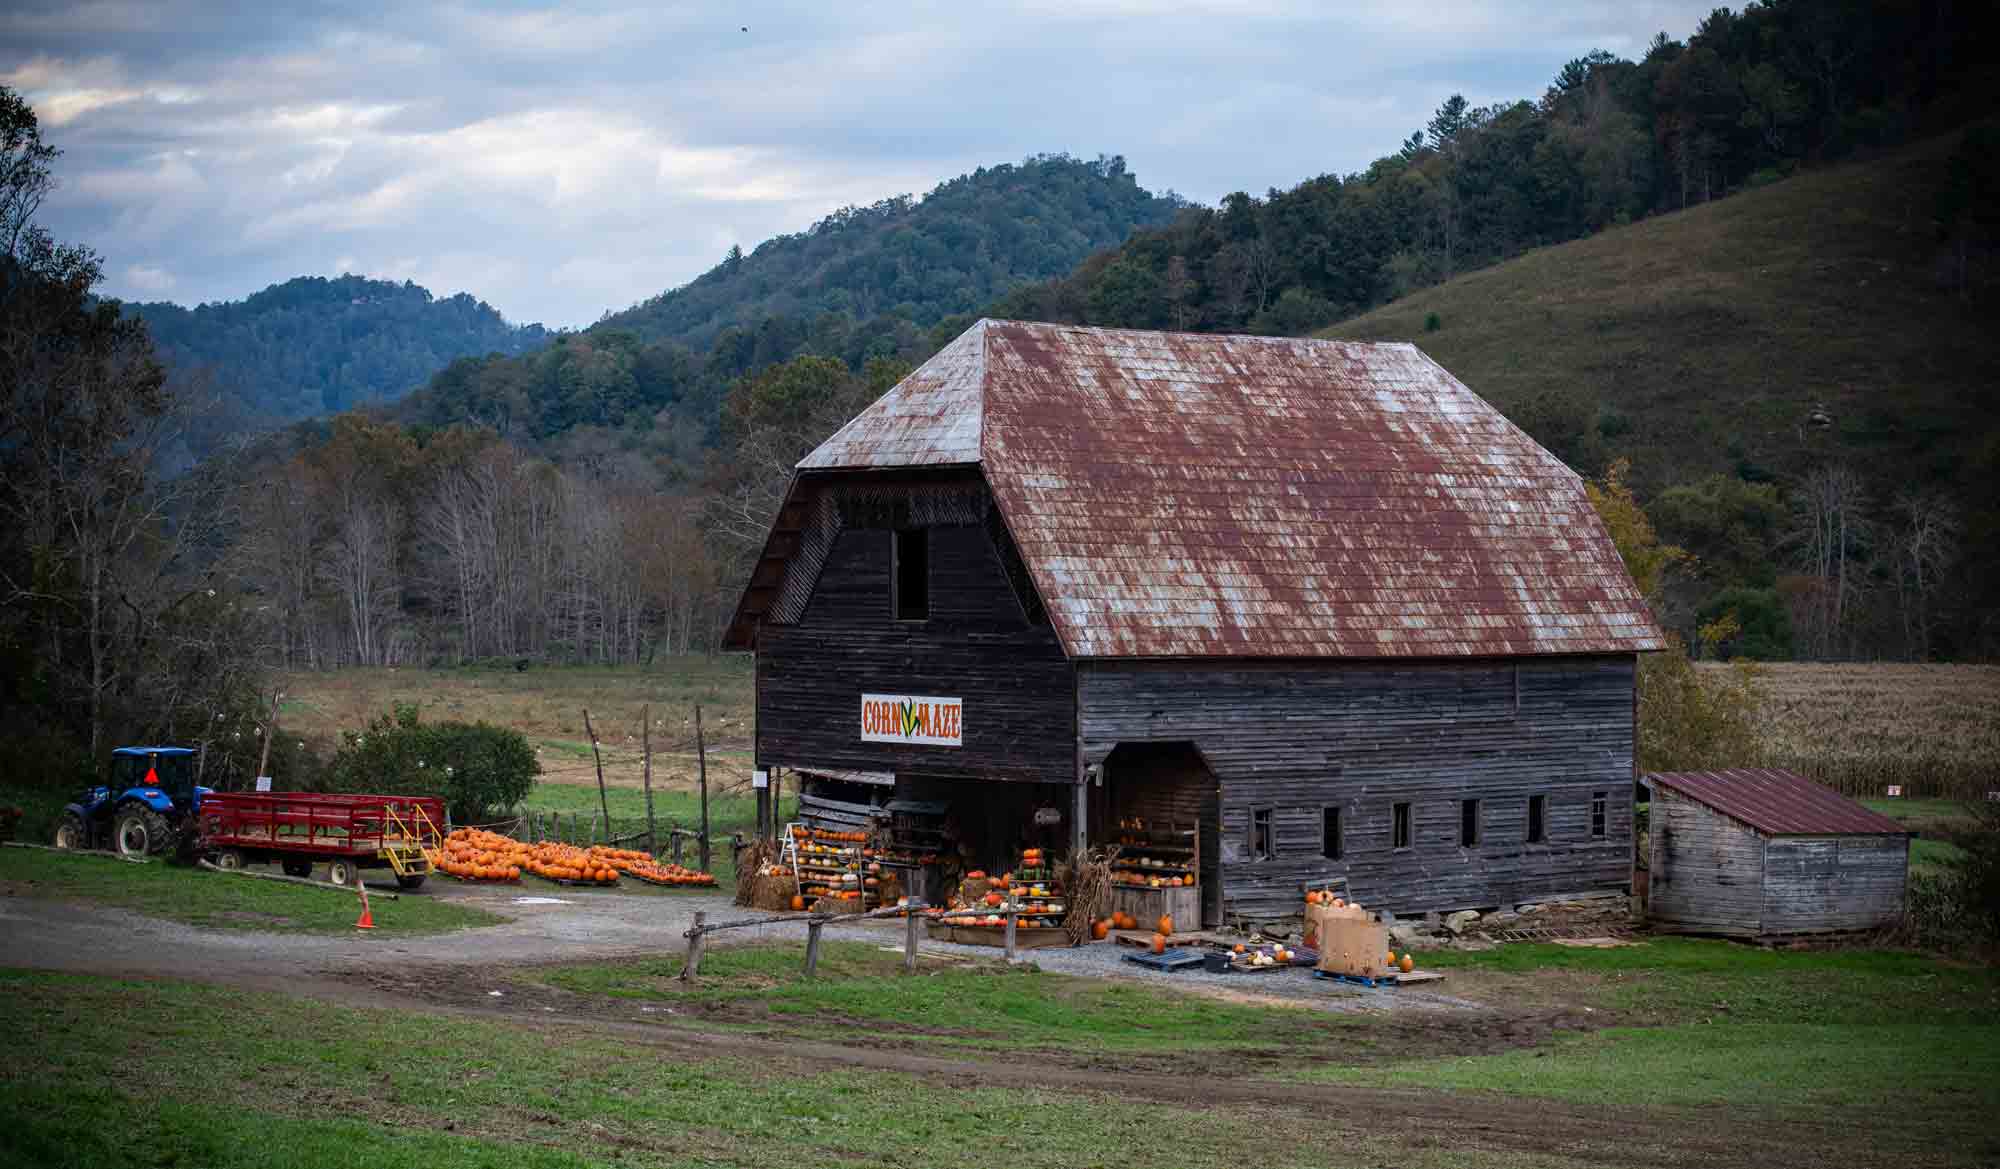 A fall day at Harvest Farm's pumpkin patch in Valle Crucis.